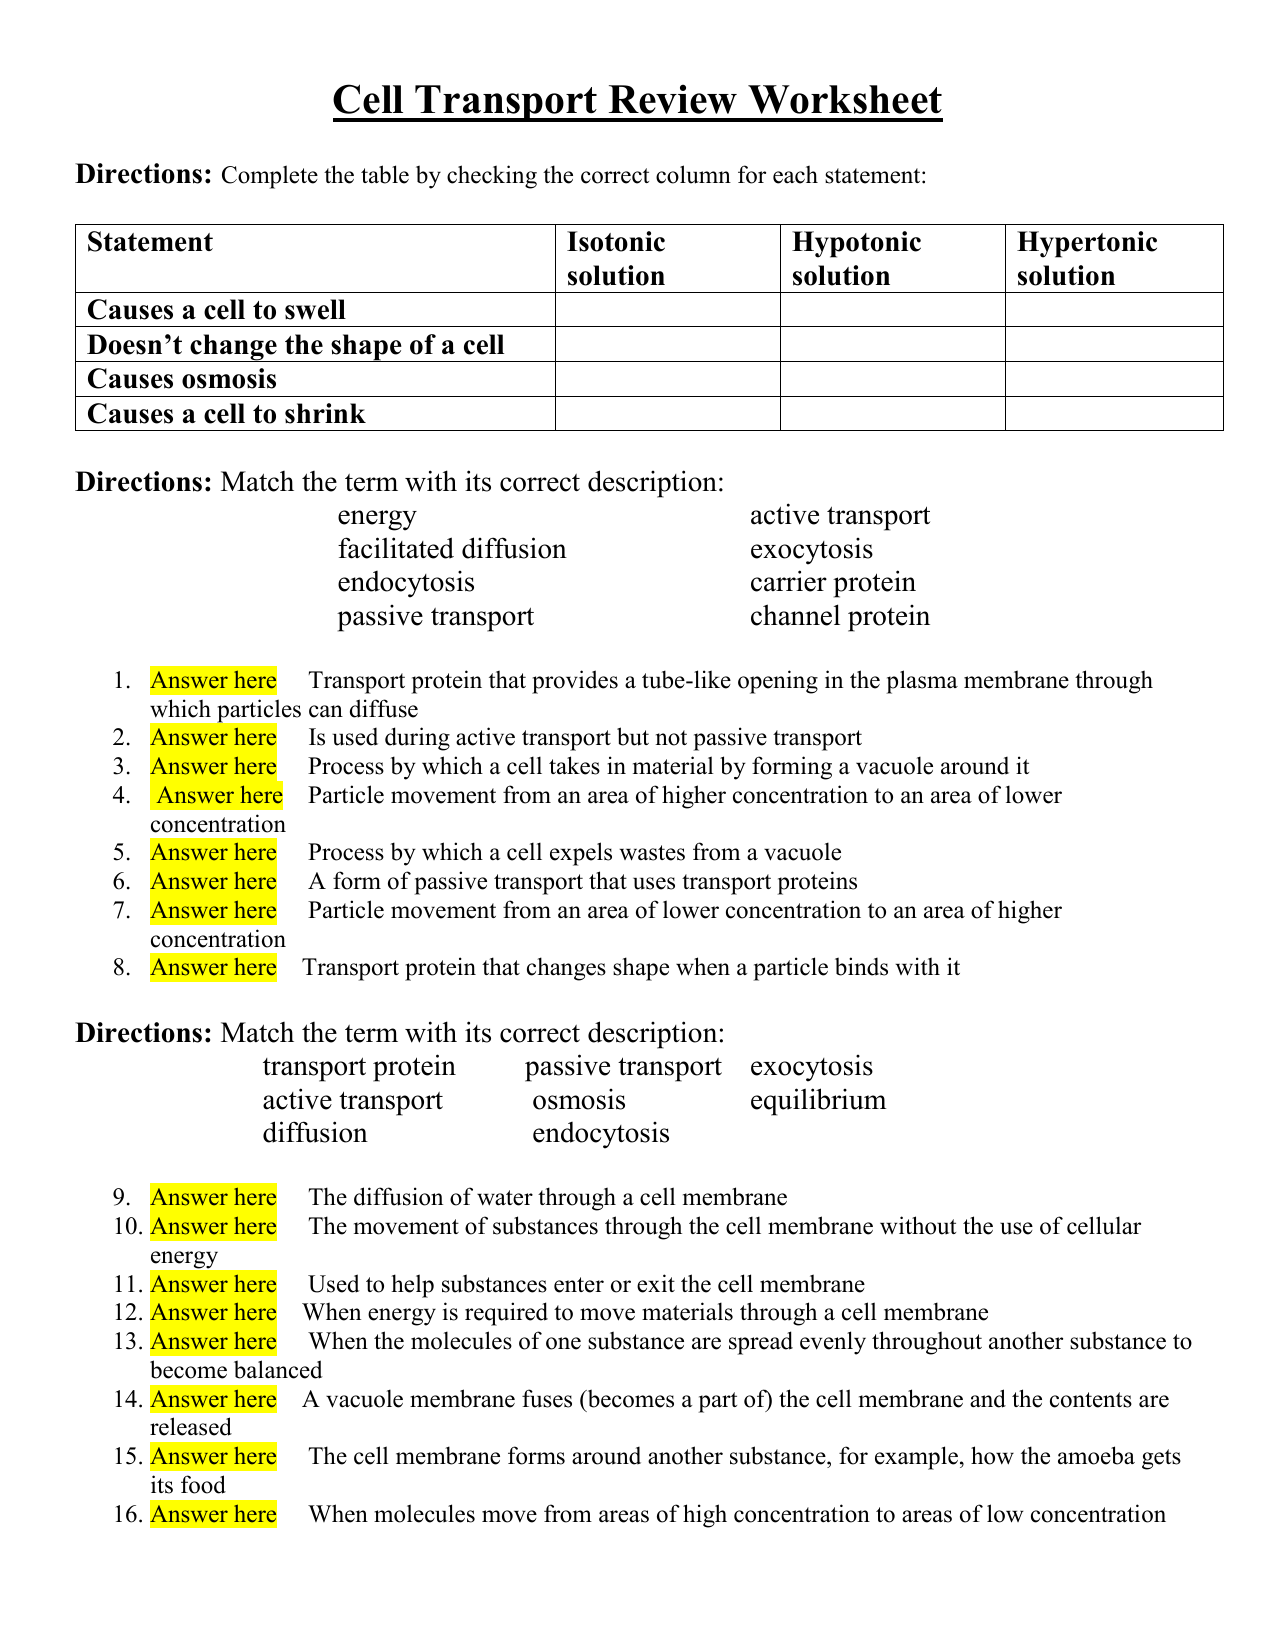 Noah Loya - Cell Transport & Review Worksheet With Cell Transport Review Worksheet